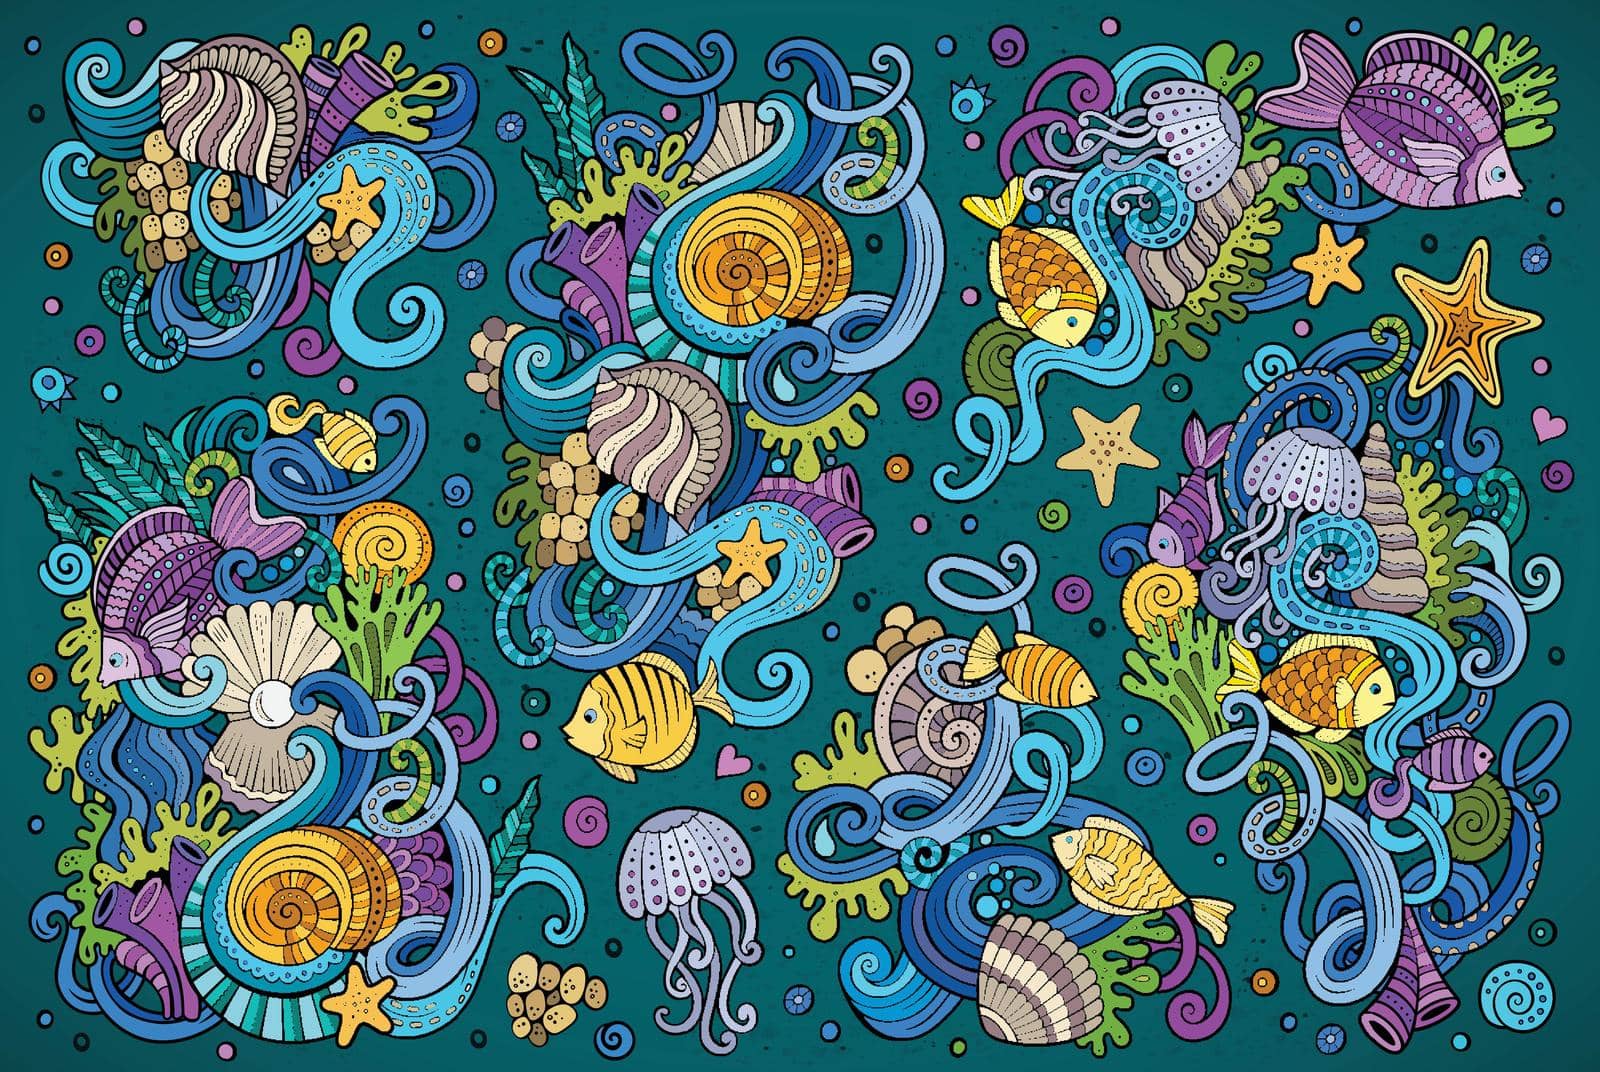 Colorful vector hand drawn Doodle cartoon set of marine life objects and symbols